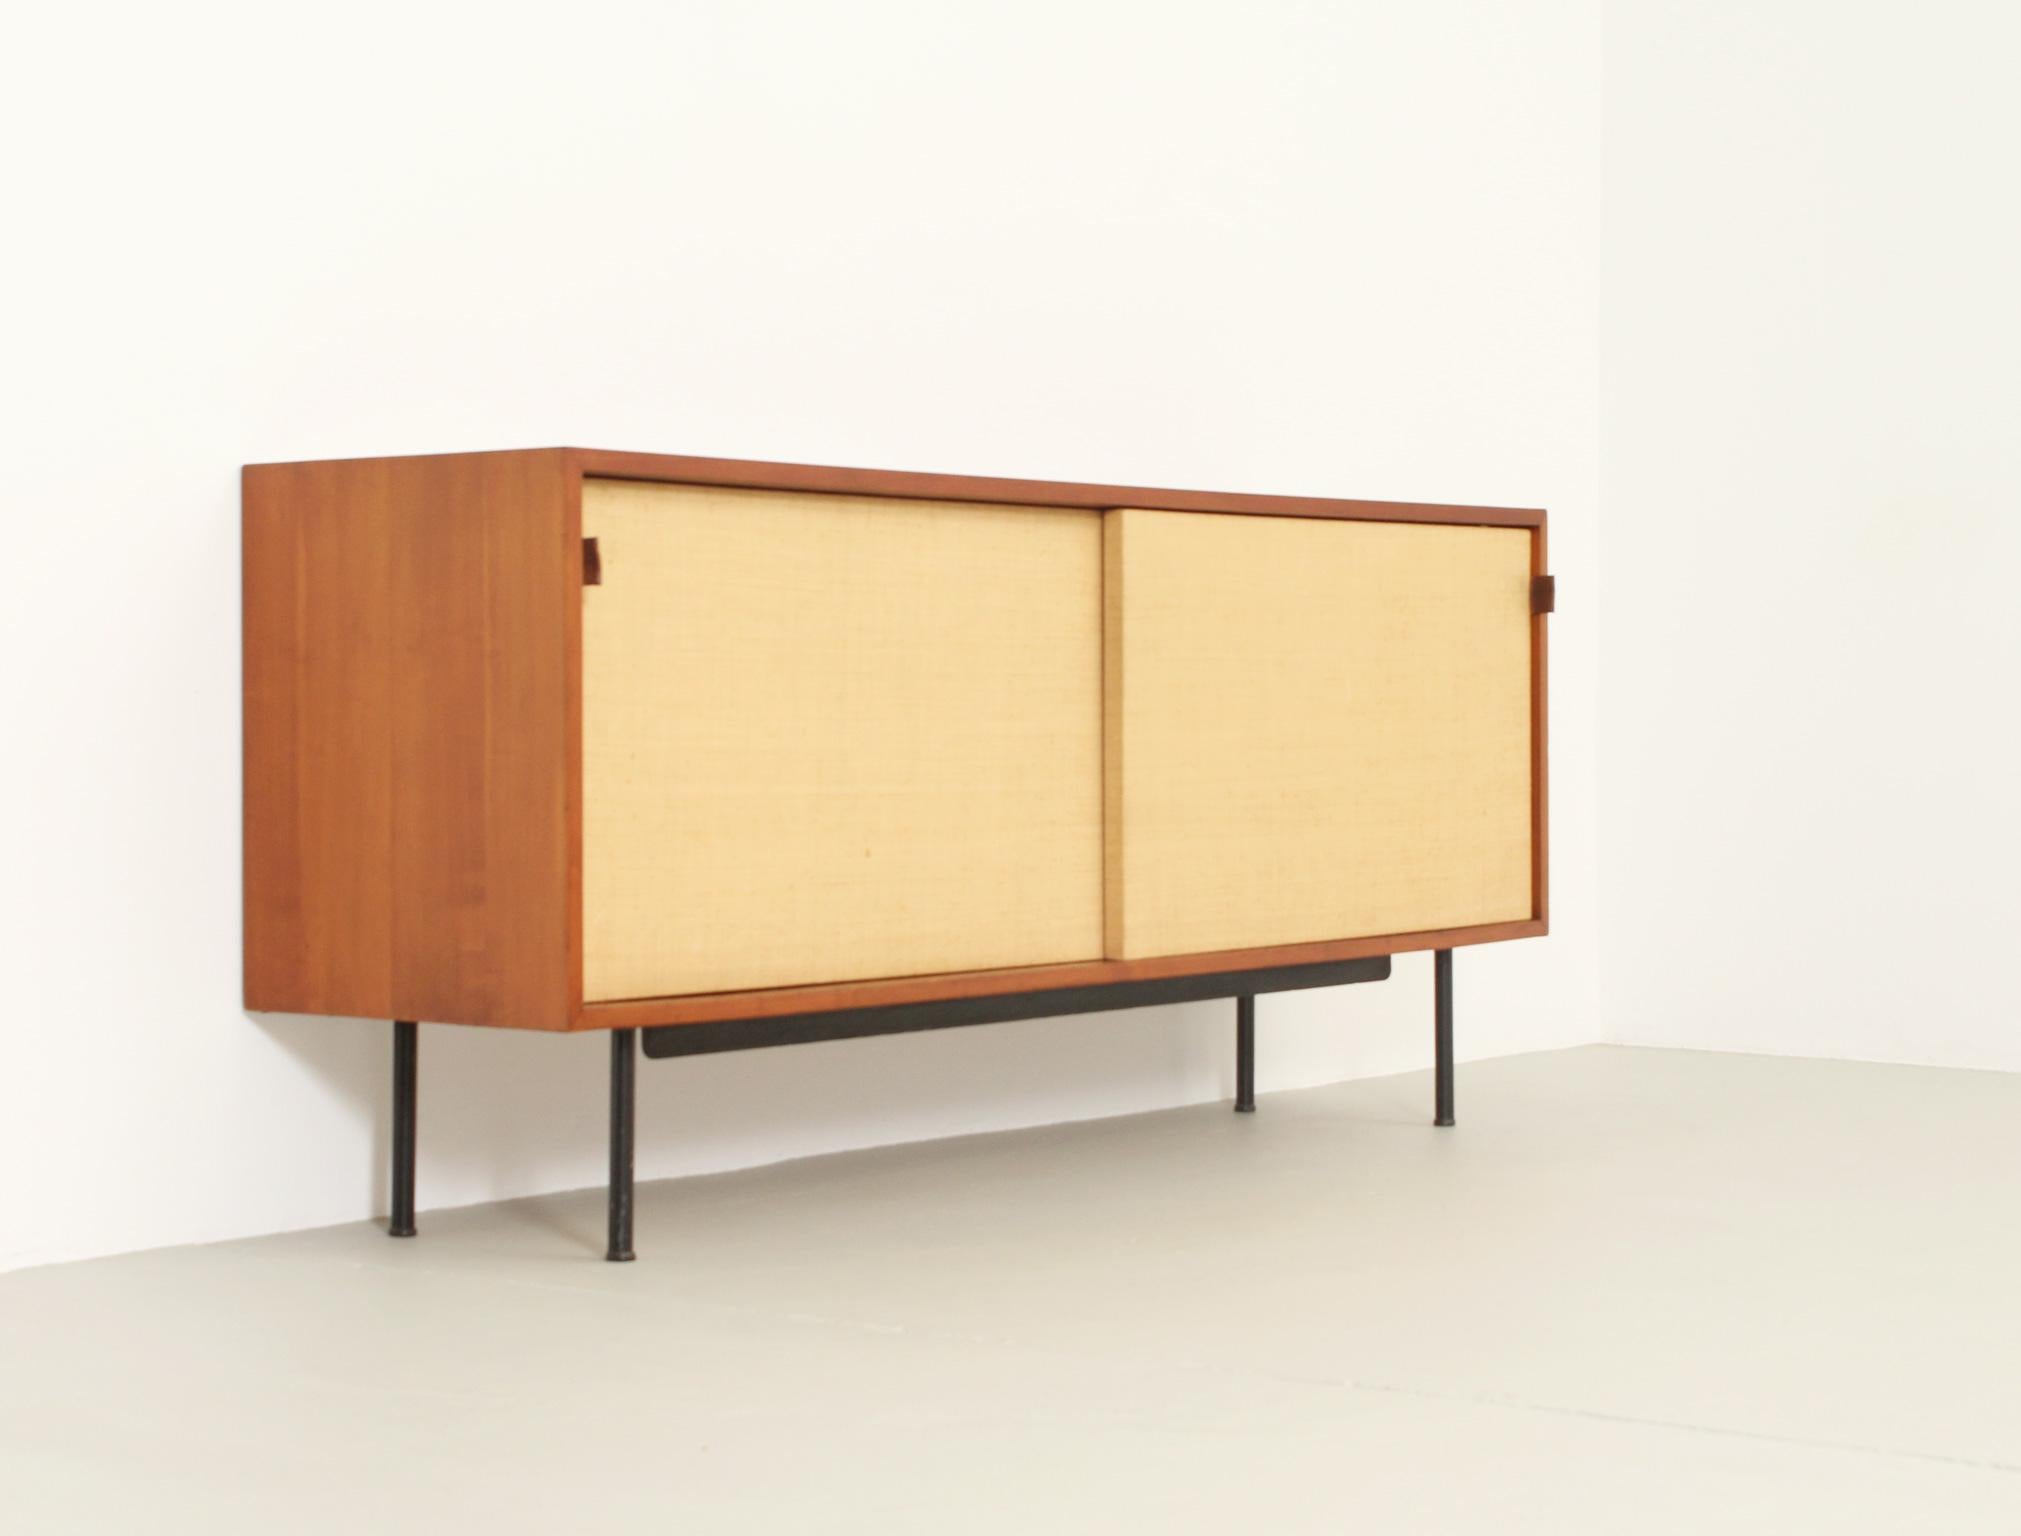 American Florence Knoll Sideboard Model 116 with Seagrass Sliding Doors For Sale